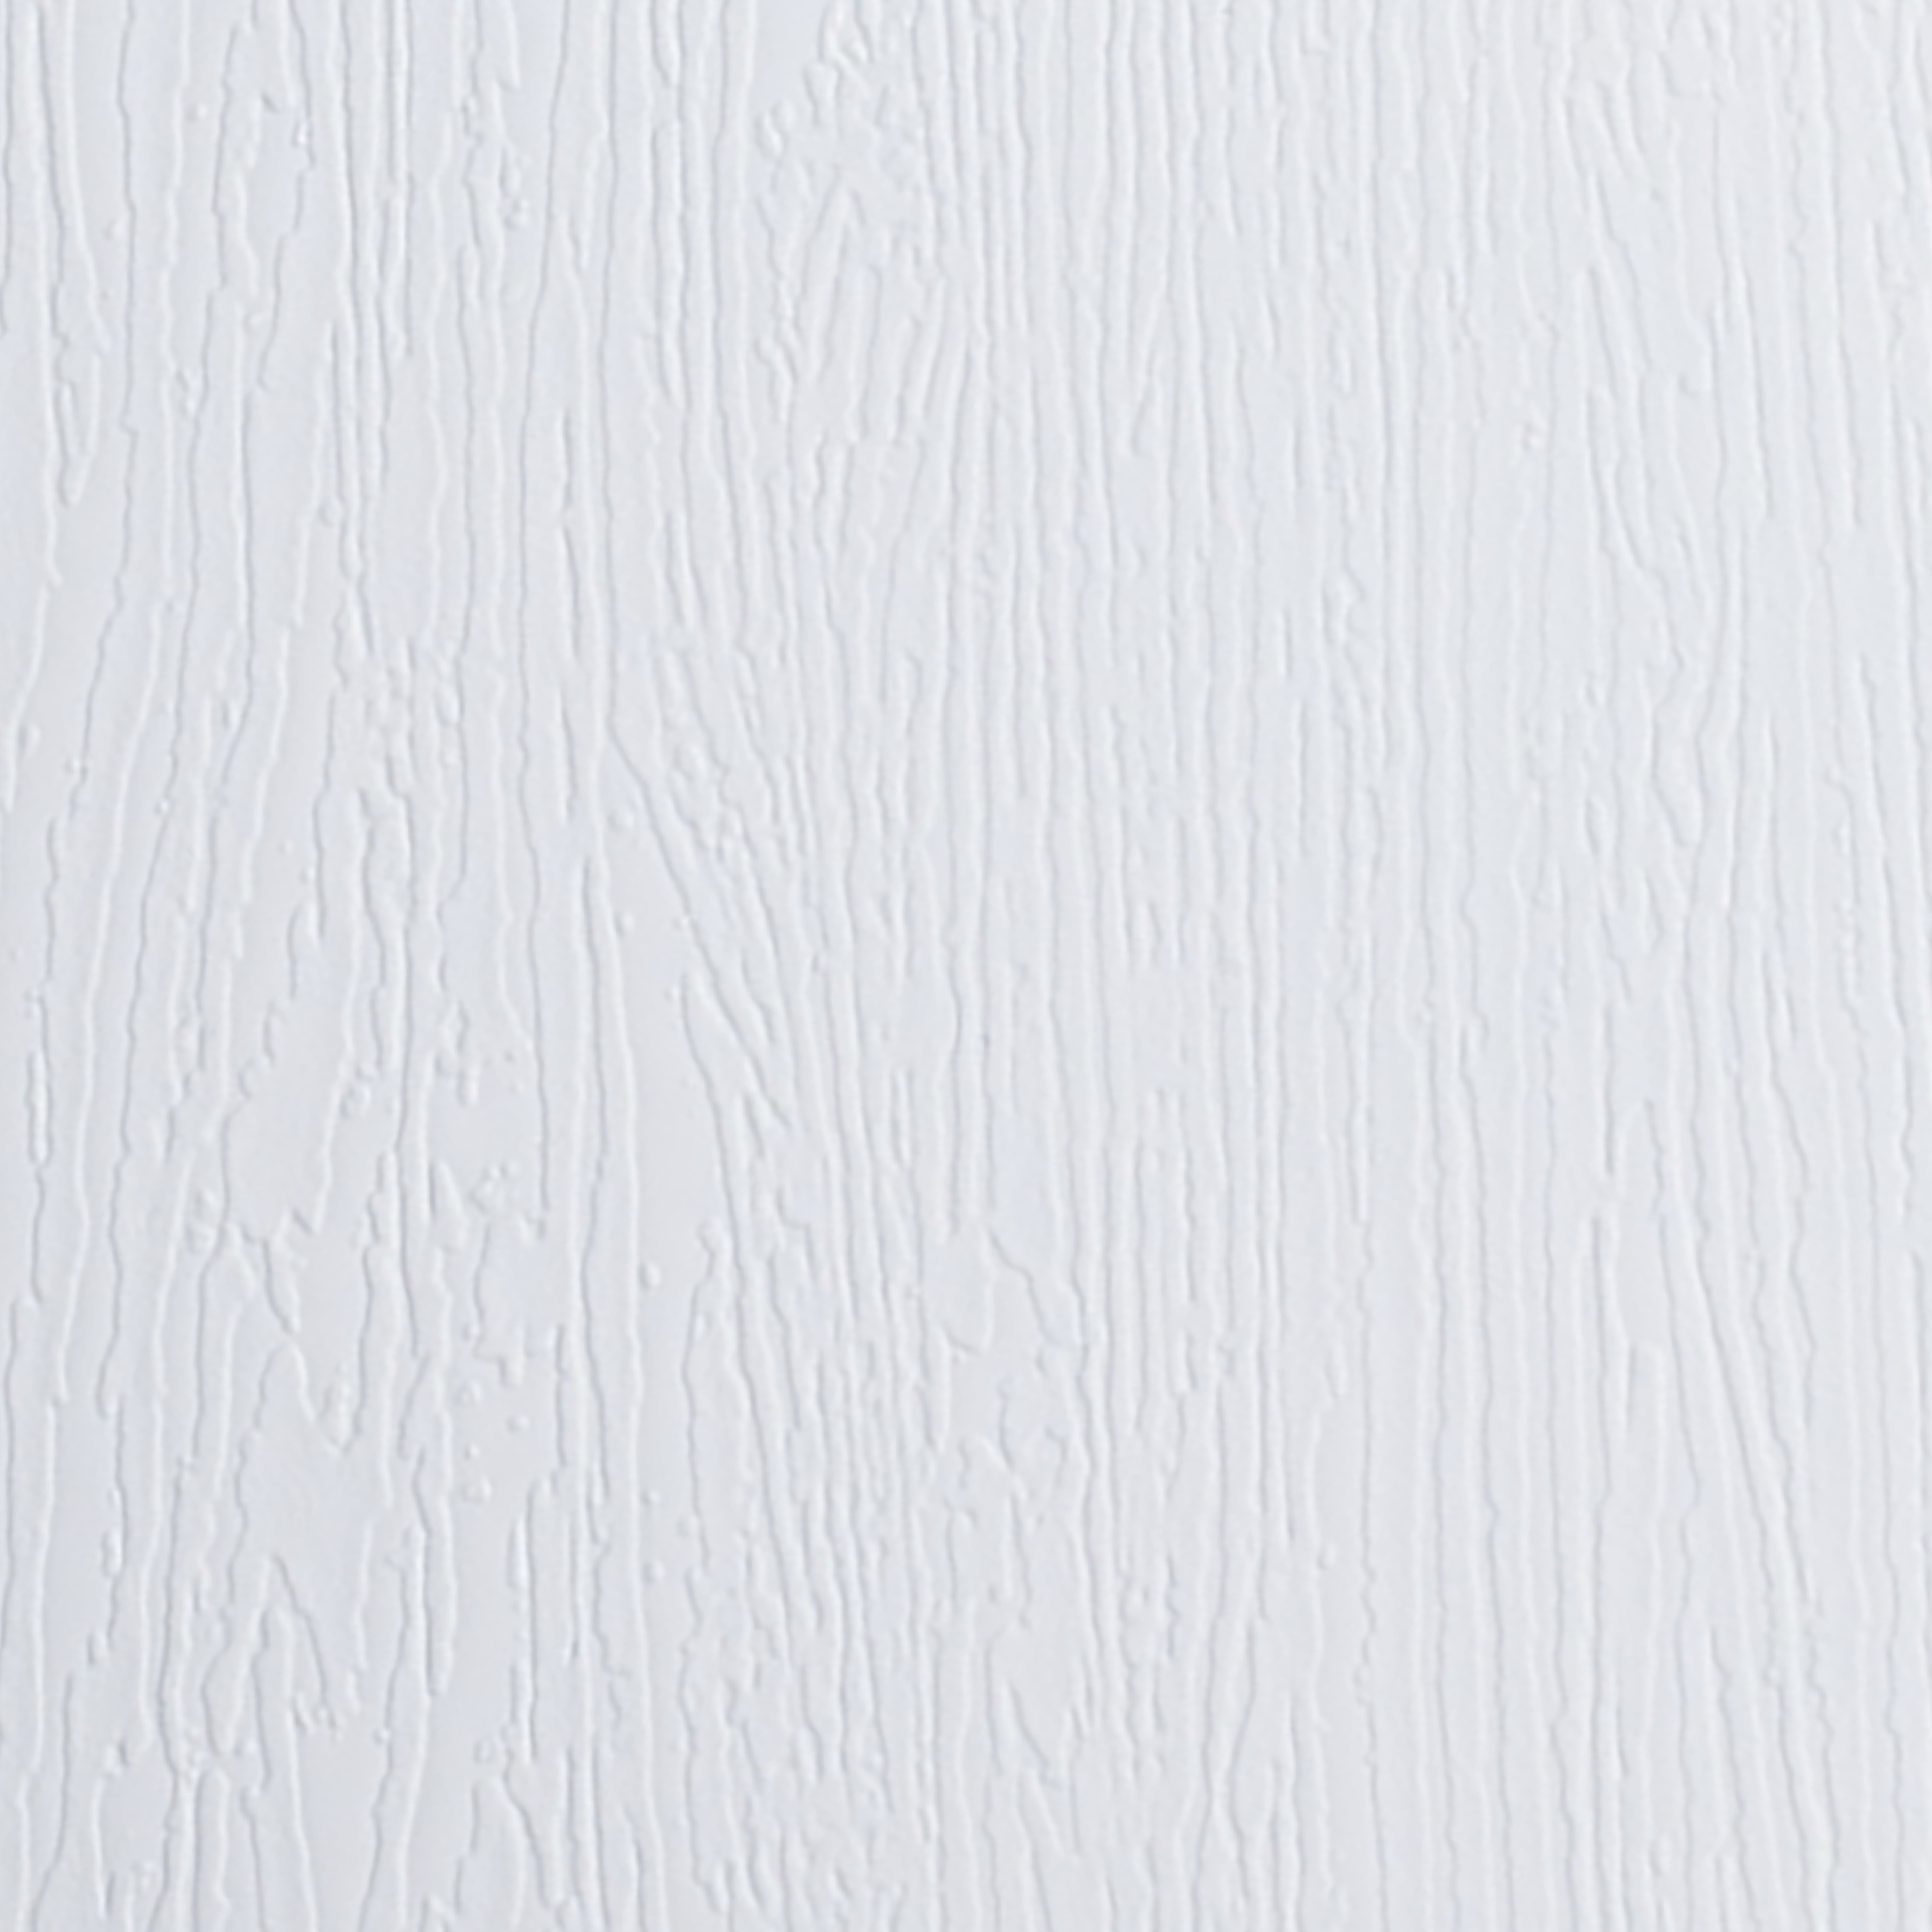 SD 910-1 - White structured wood